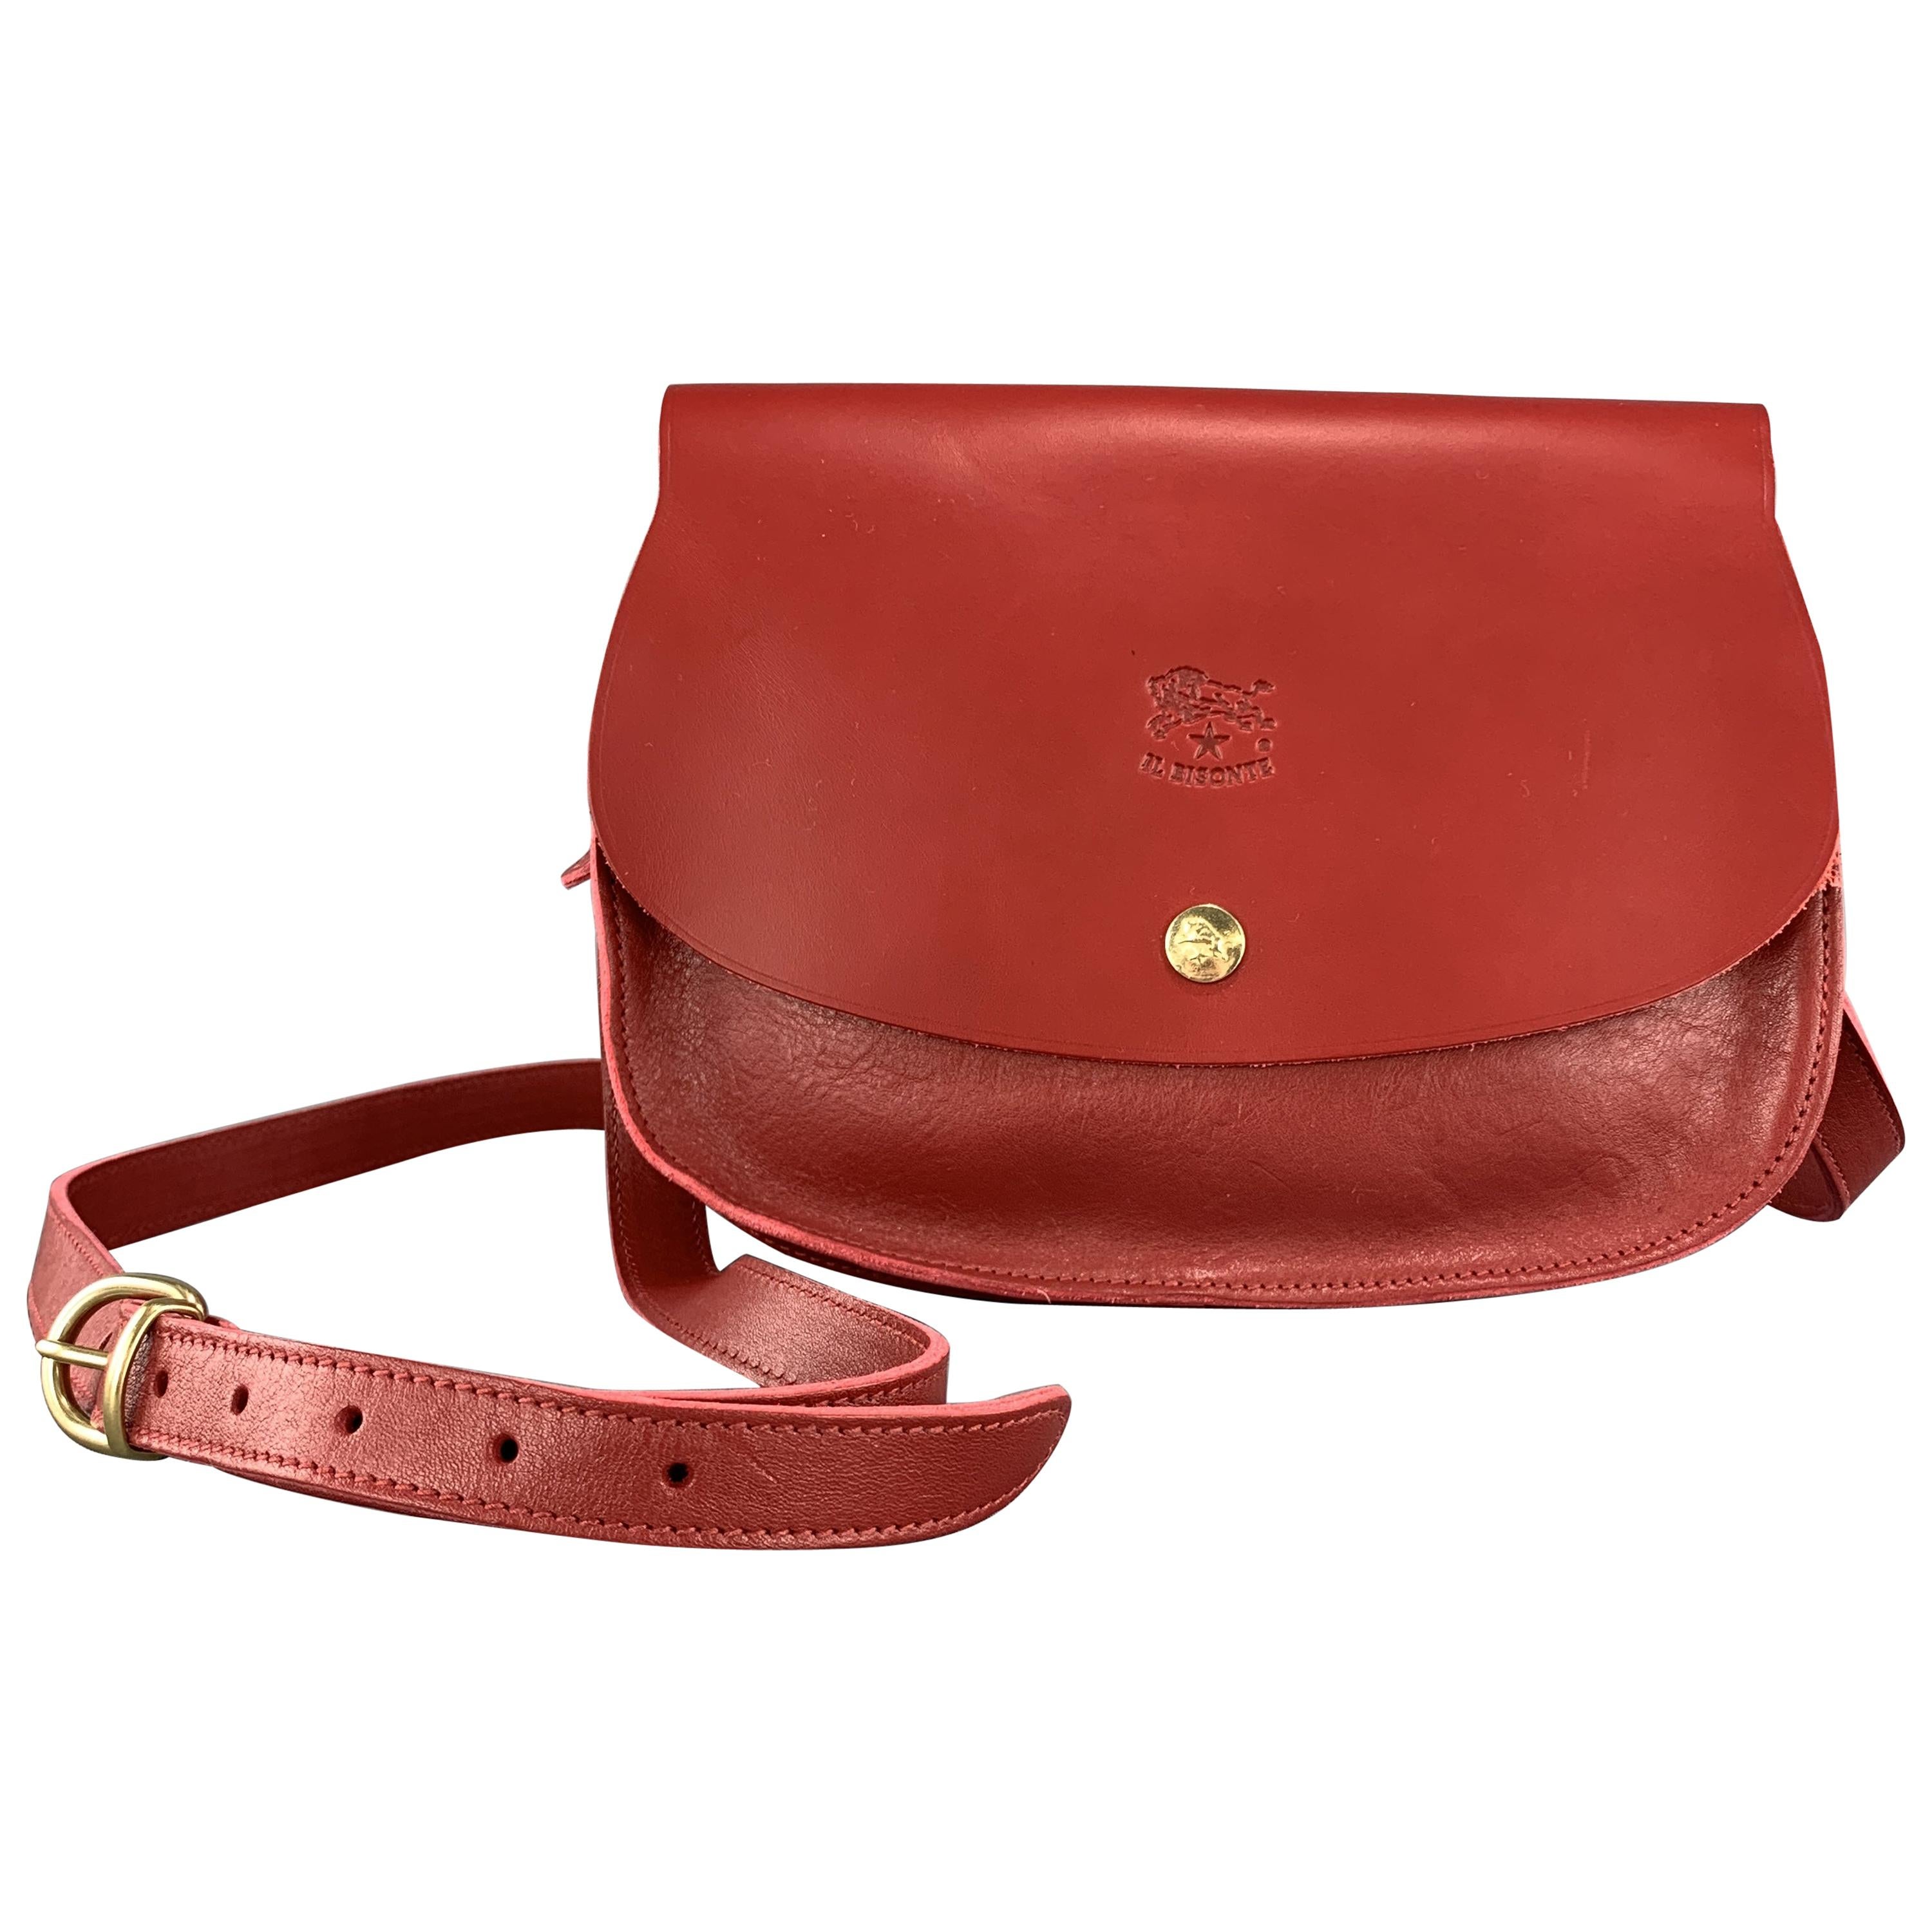 IL BISONTE Red Leather cLASSIC Saddle Cross Body Handbag